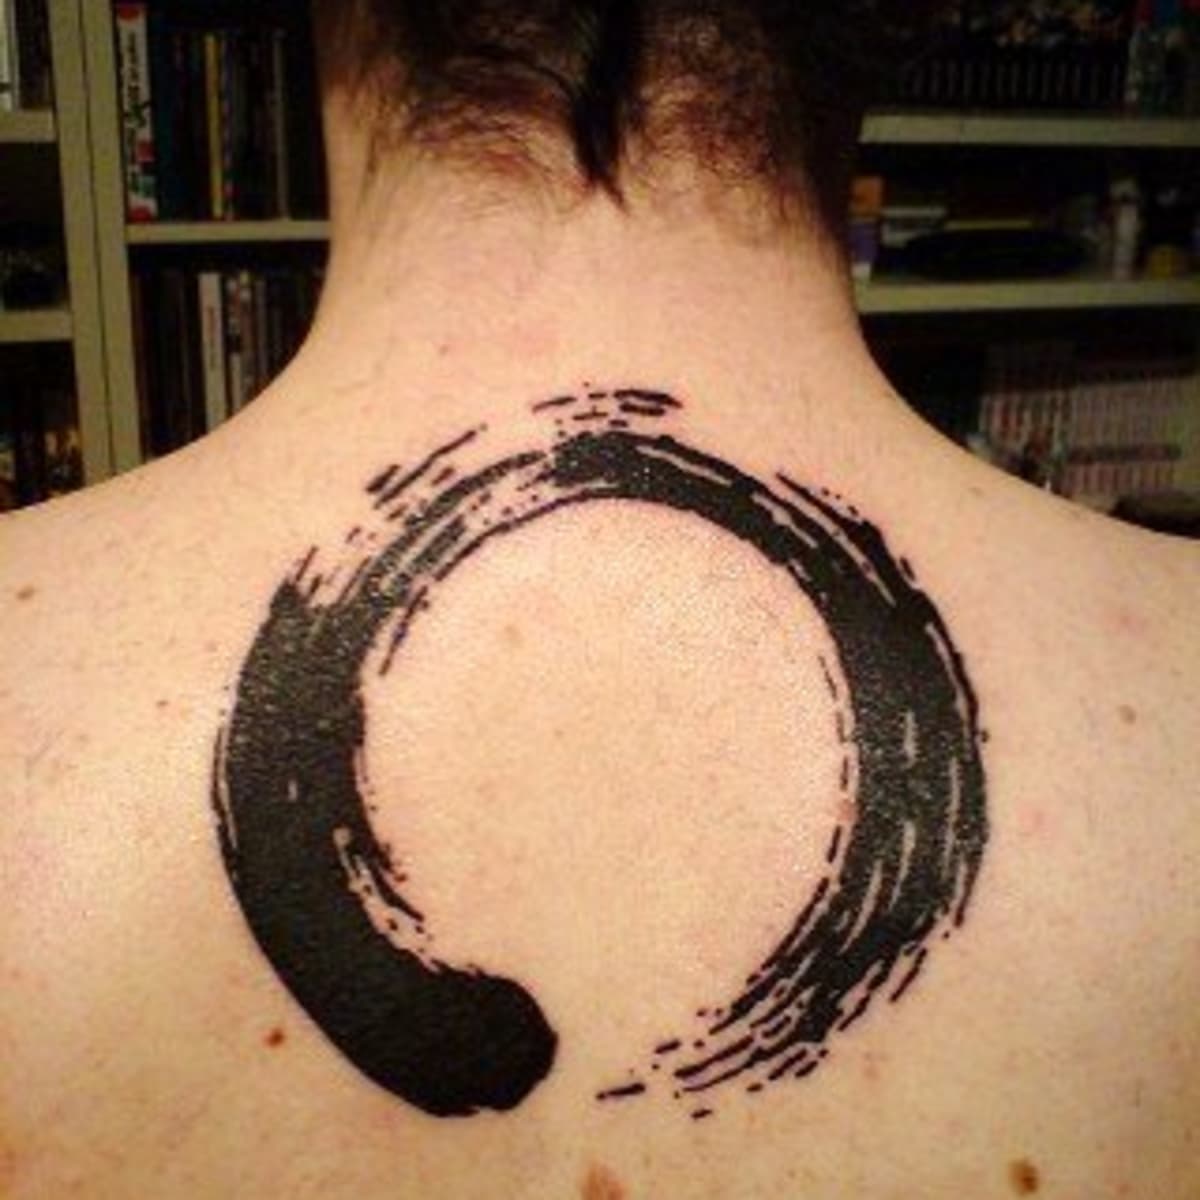 Enso tattoo on the thigh